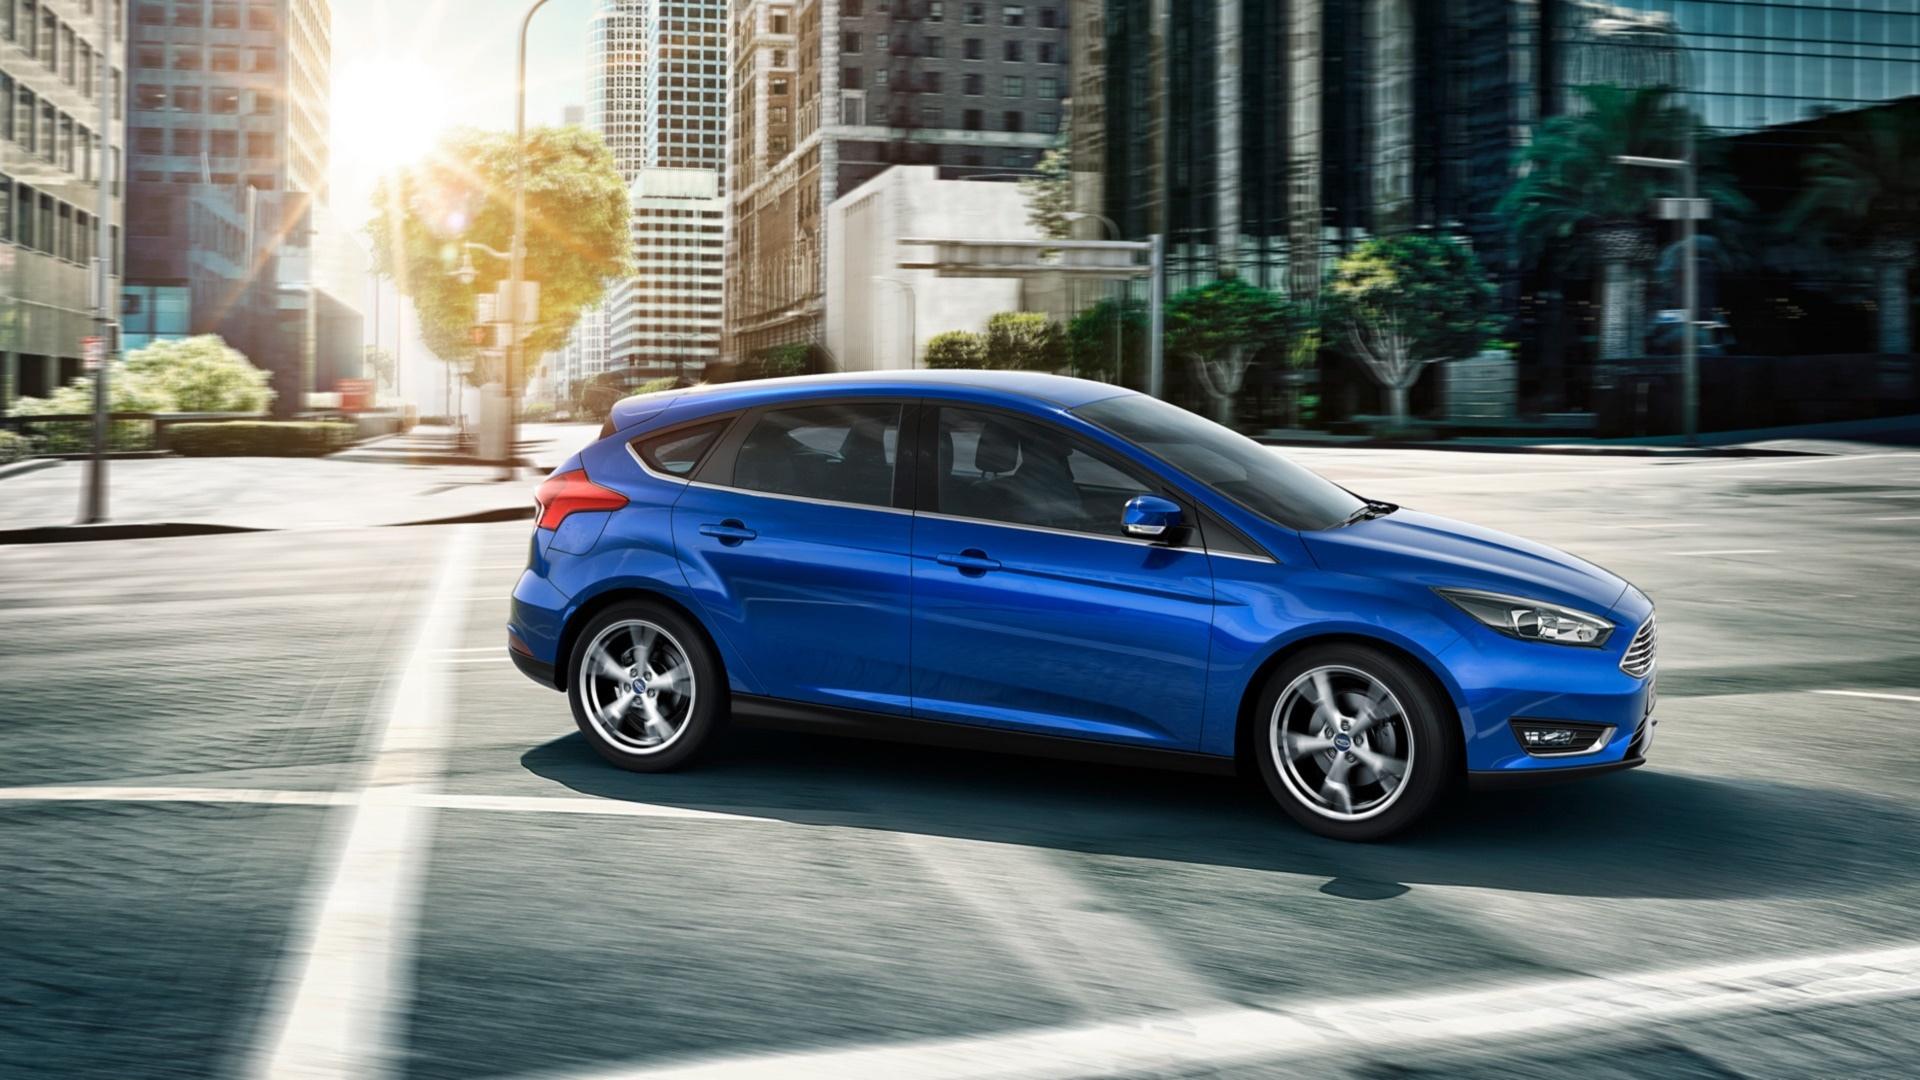 2015 Ford Focus wallpapers HD quality